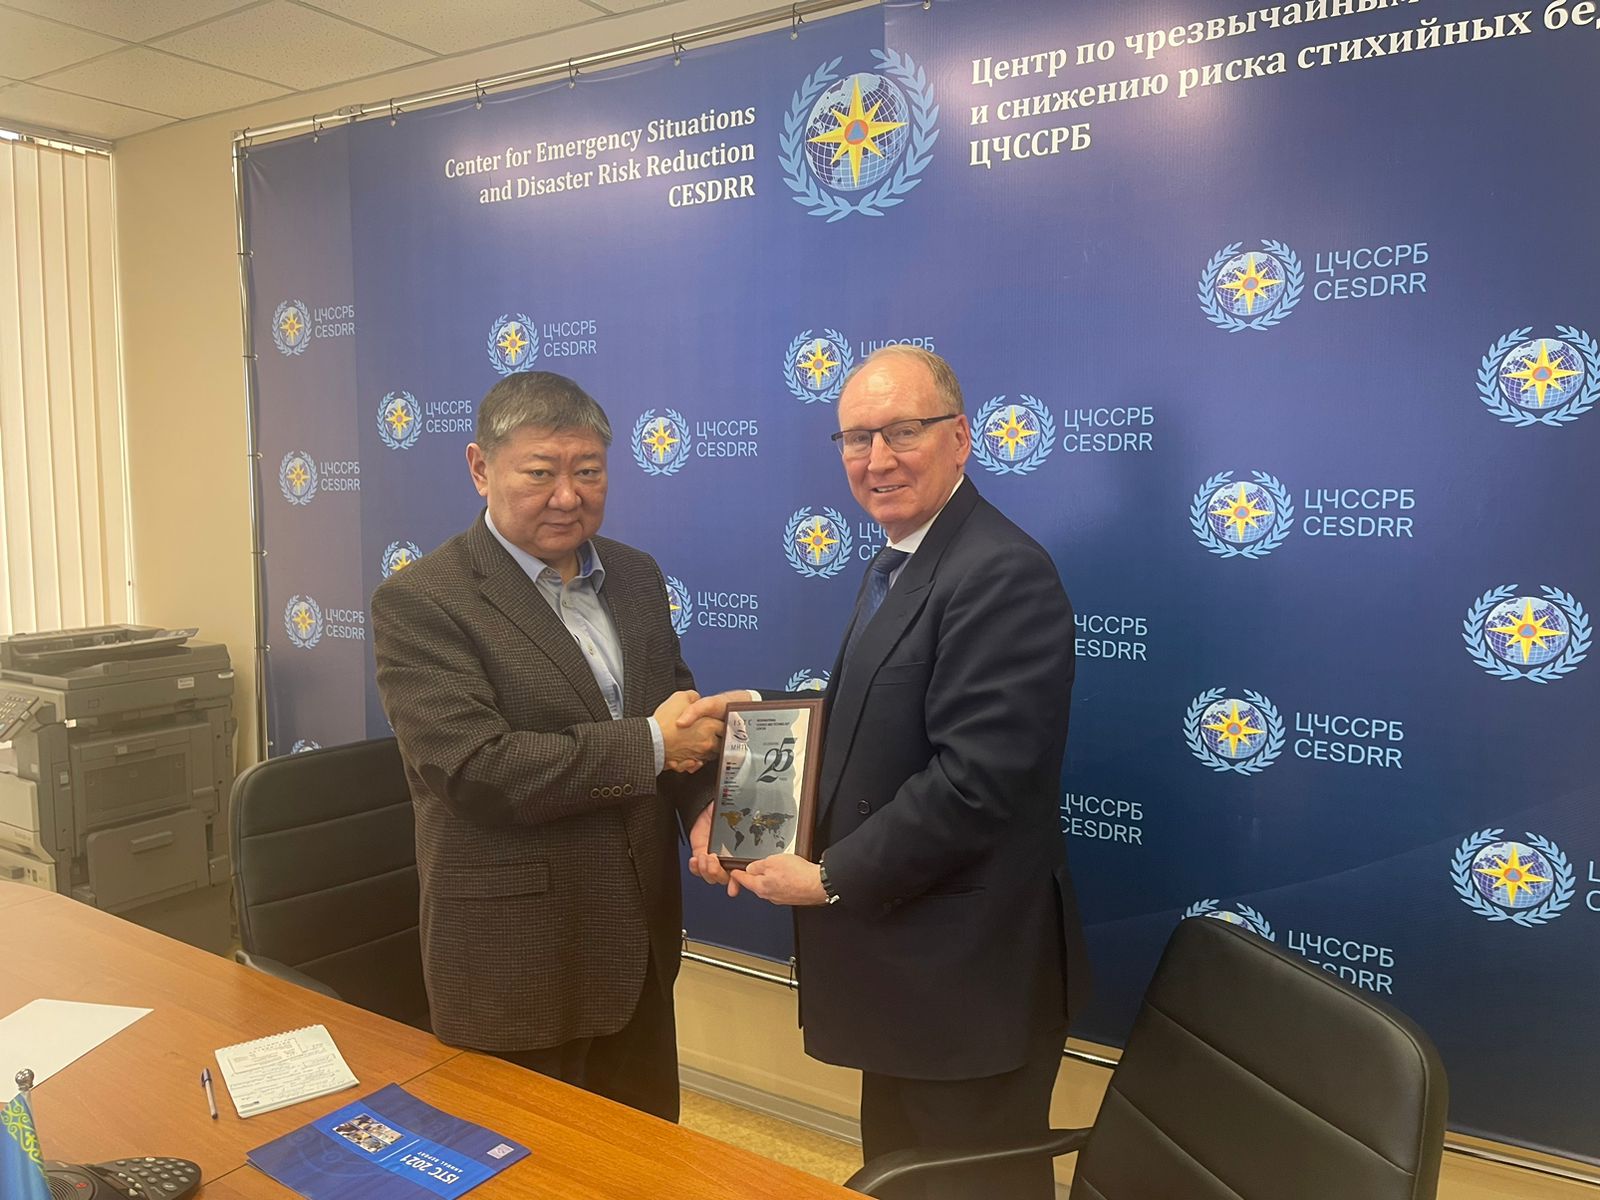 ISTC Meeting with The Center for Emergency Situations and Disaster Risk Reduction, Republic of Kazakhstan (CESDRR)